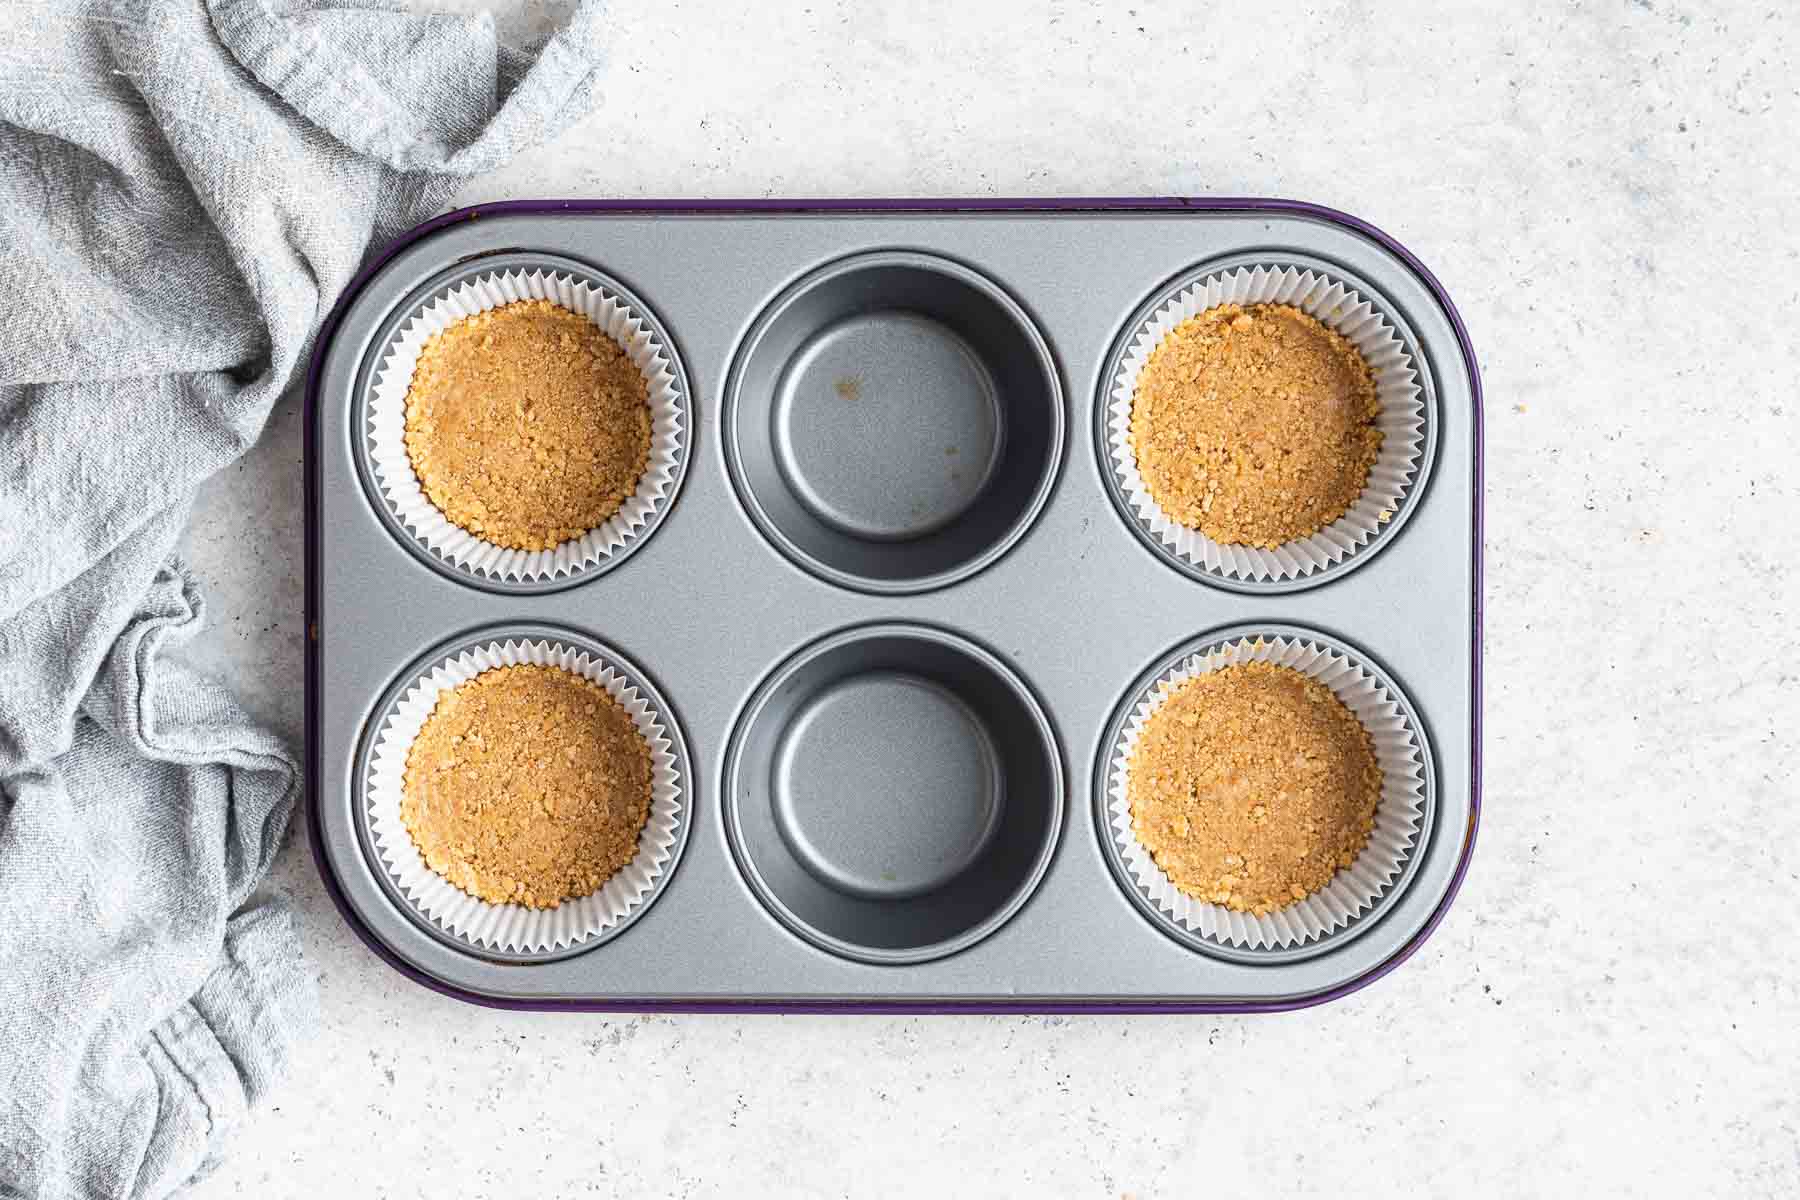 Four muffin cups with graham cracker crust packed inside.